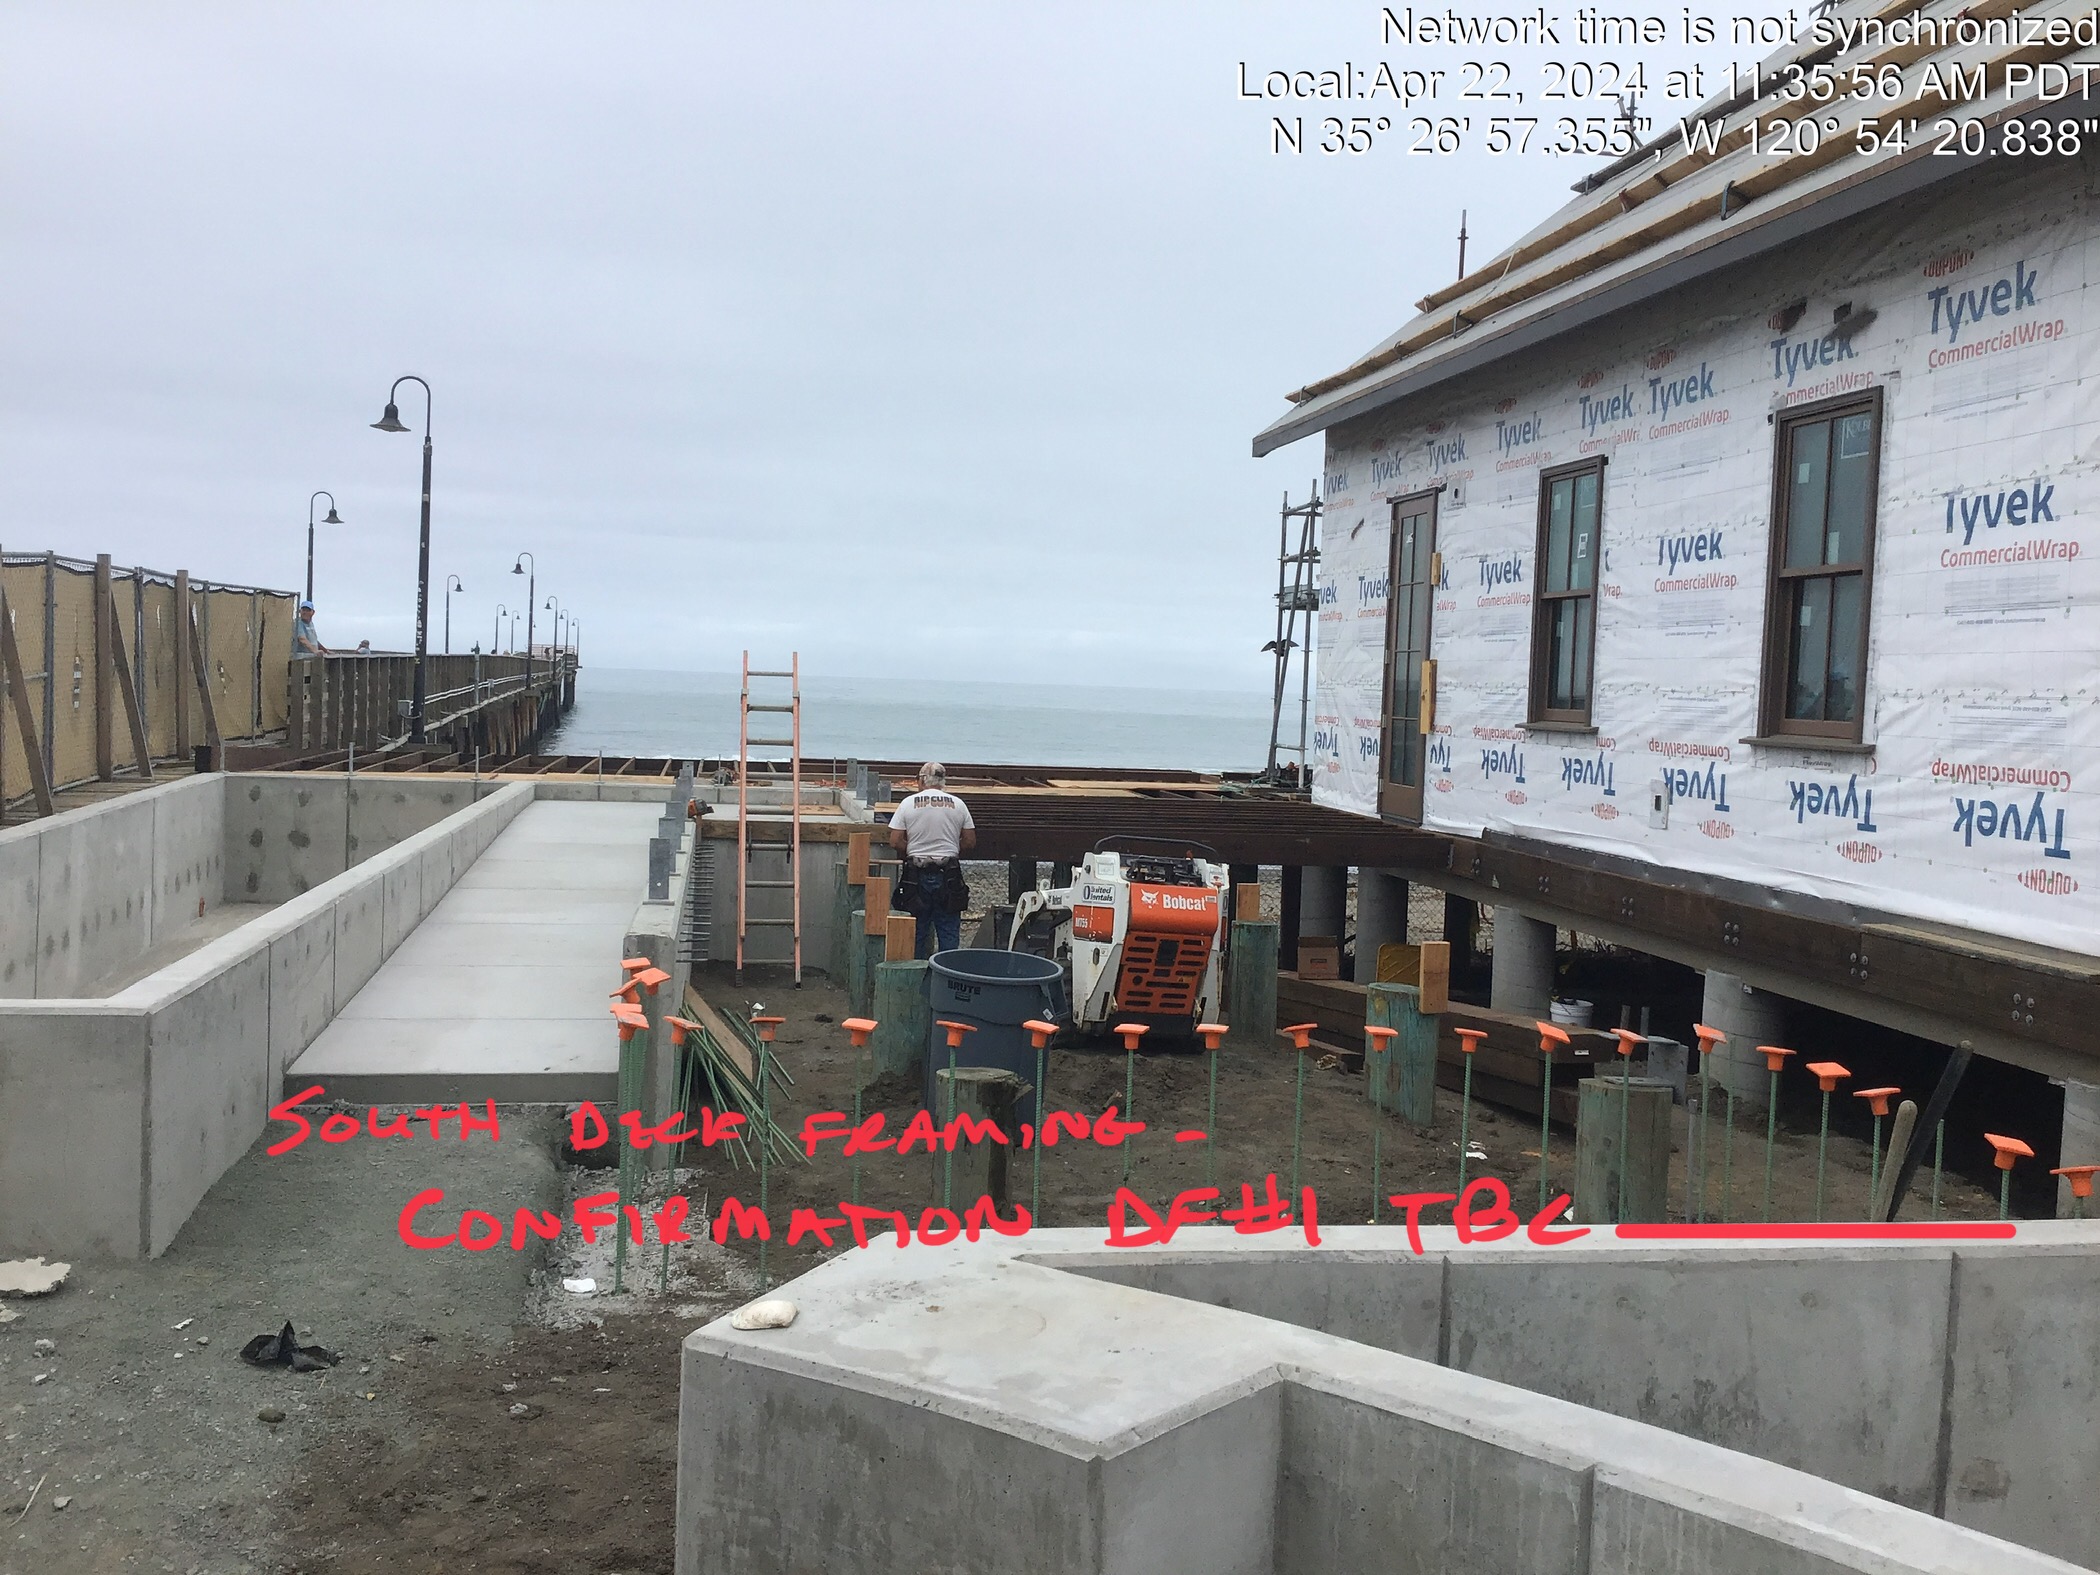 Forming of concrete walls and ramps